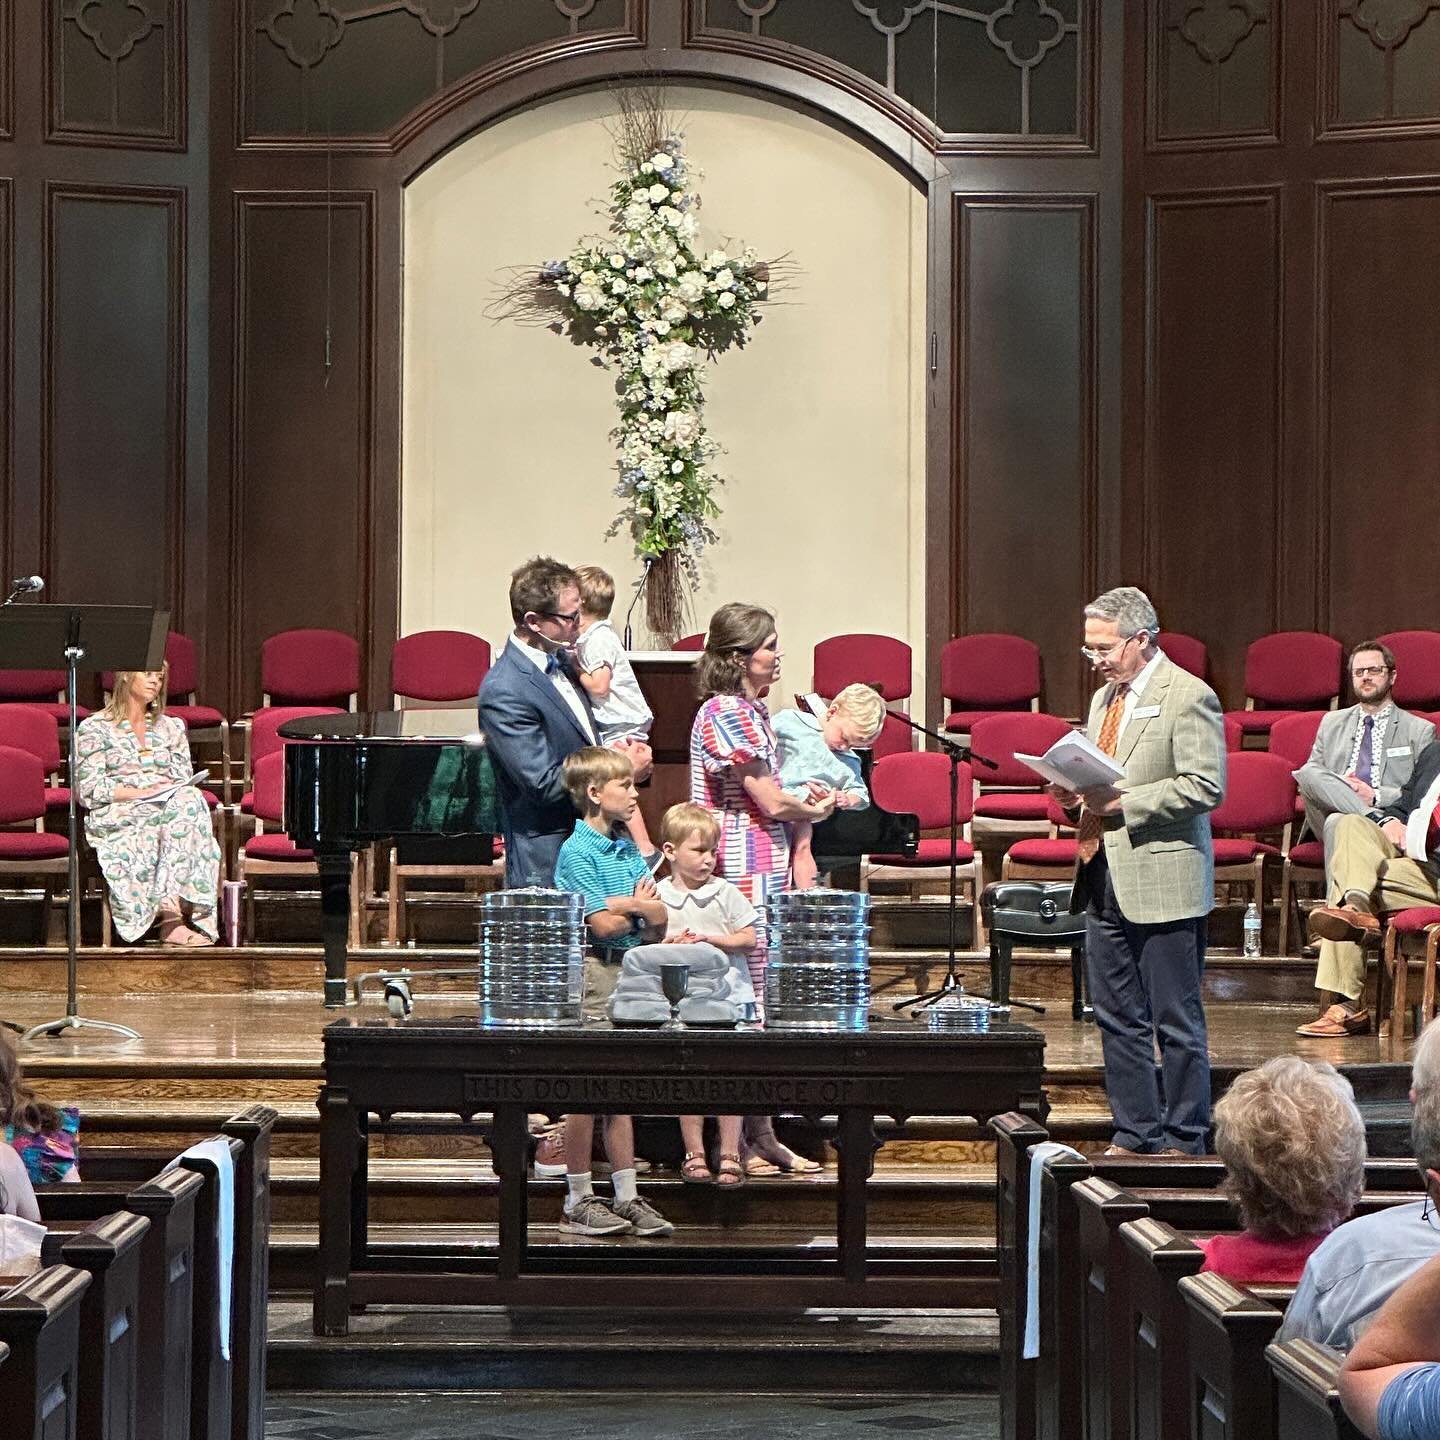 We had a joyful and full day on Sunday commissioning and celebrating the Johnson family. Please pray that they will have as smooth a transition as possible to the mission field. Pray that they will find a home in Honduras that will allow them to invi